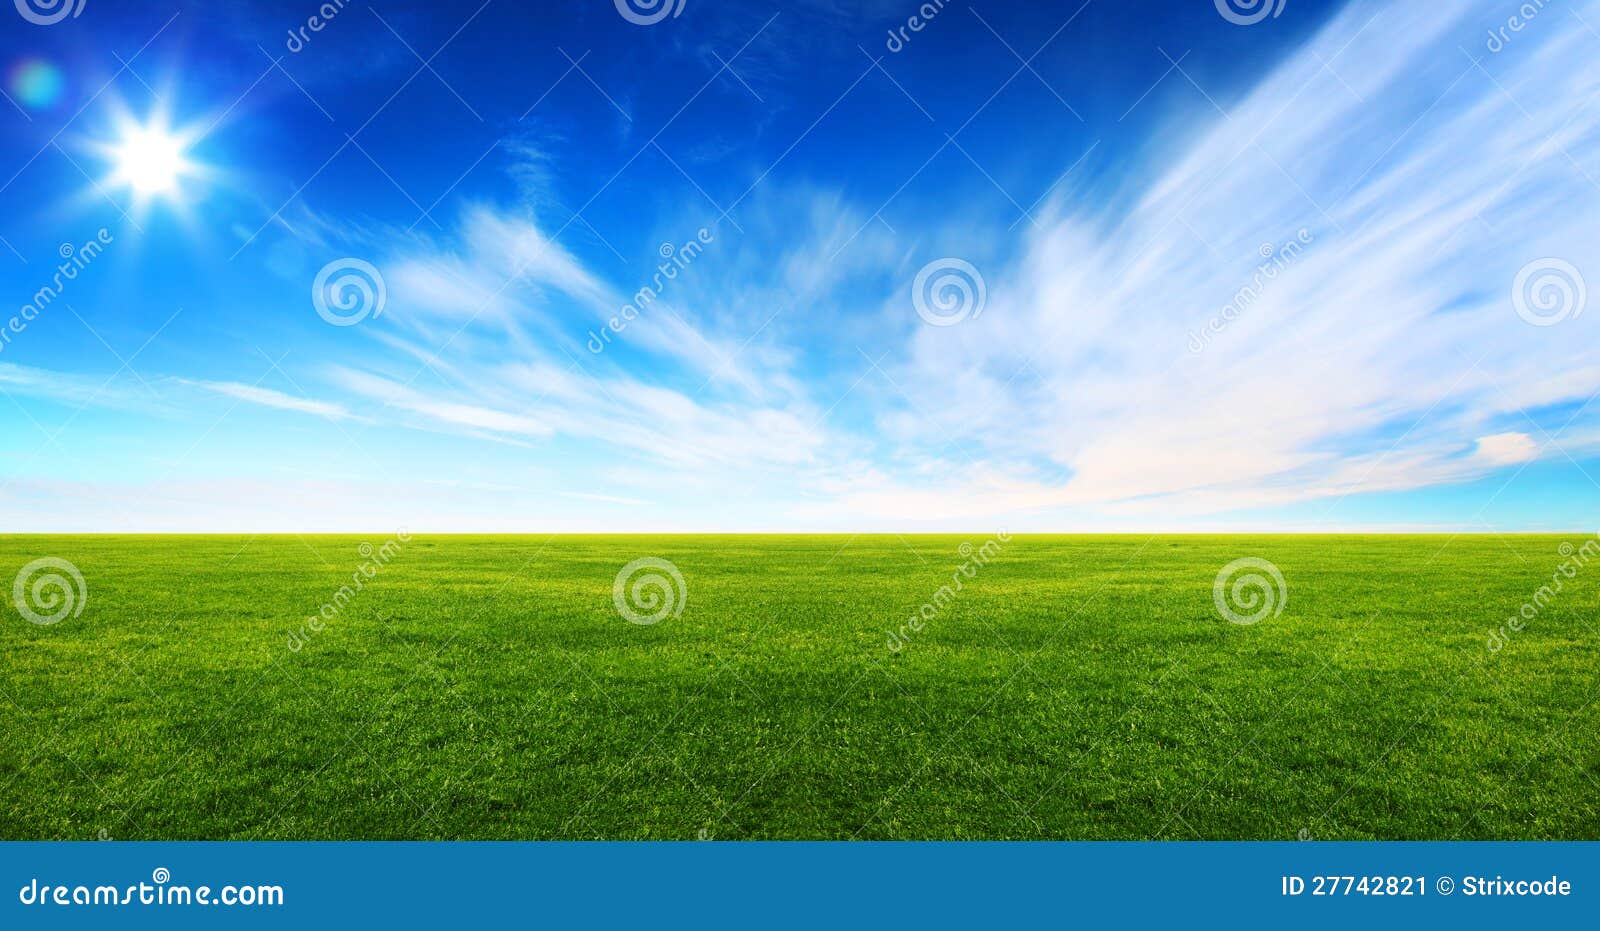 wide image of green grass field